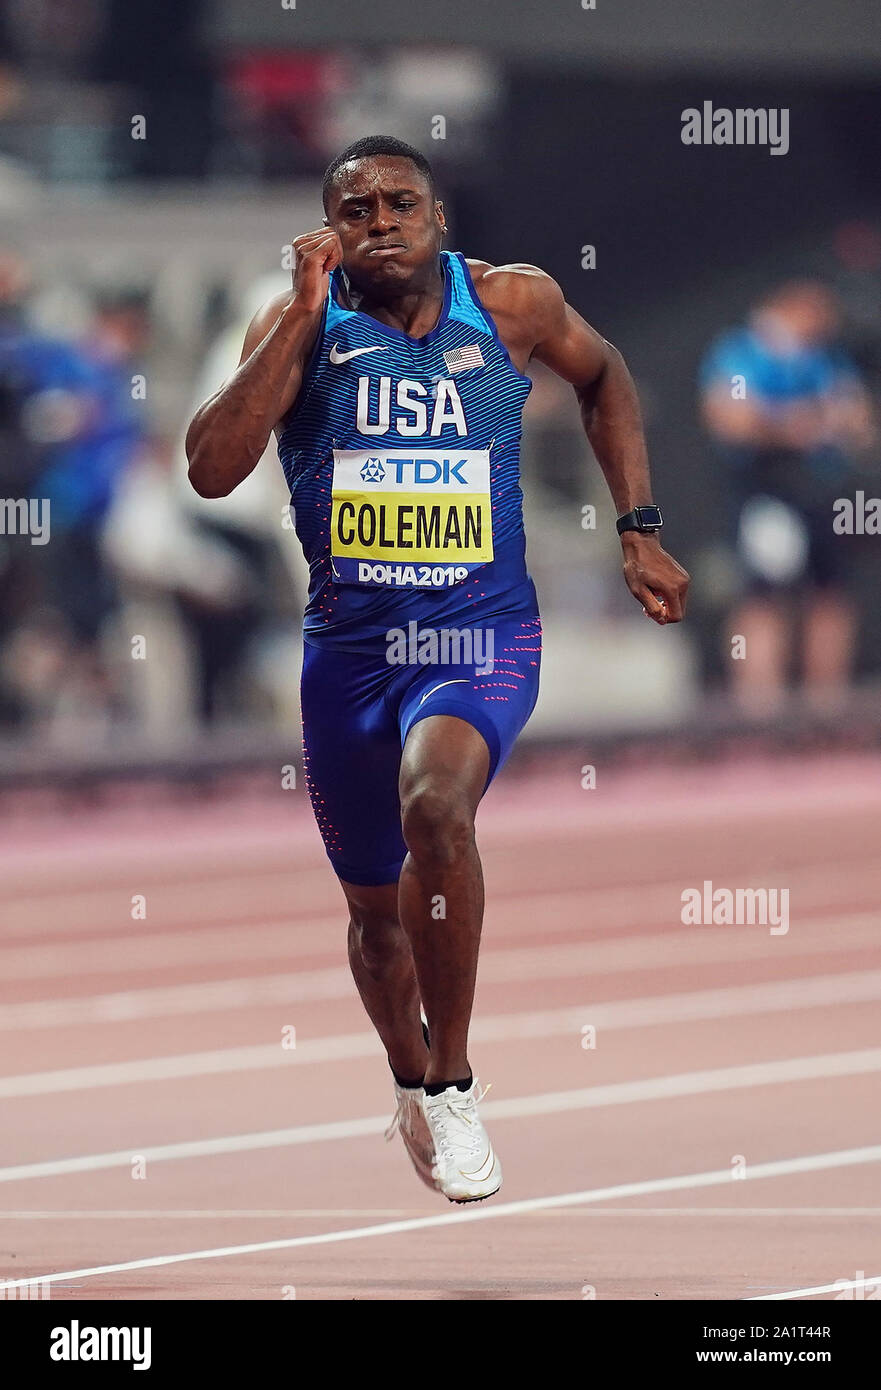 Doha, Qatar. 28th Sep, 2019. Christian Coleman of United States !! competing in the 100 meter for men during the 17th IAAF World Athletics Championships at the Khalifa Stadium in Doha, Qatar. Ulrik Pedersen/CSM/Alamy Live News Stock Photo